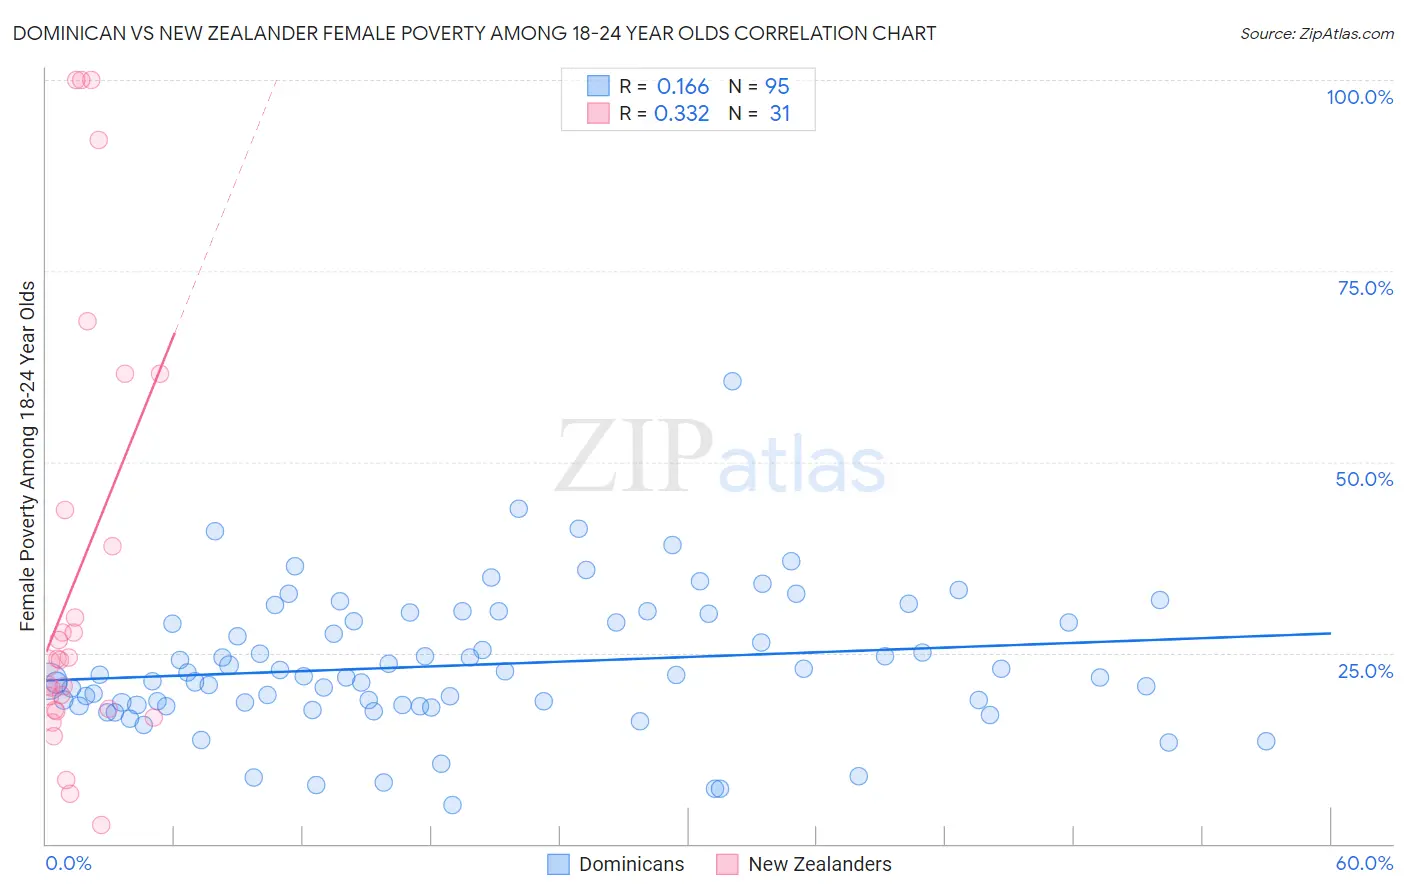 Dominican vs New Zealander Female Poverty Among 18-24 Year Olds